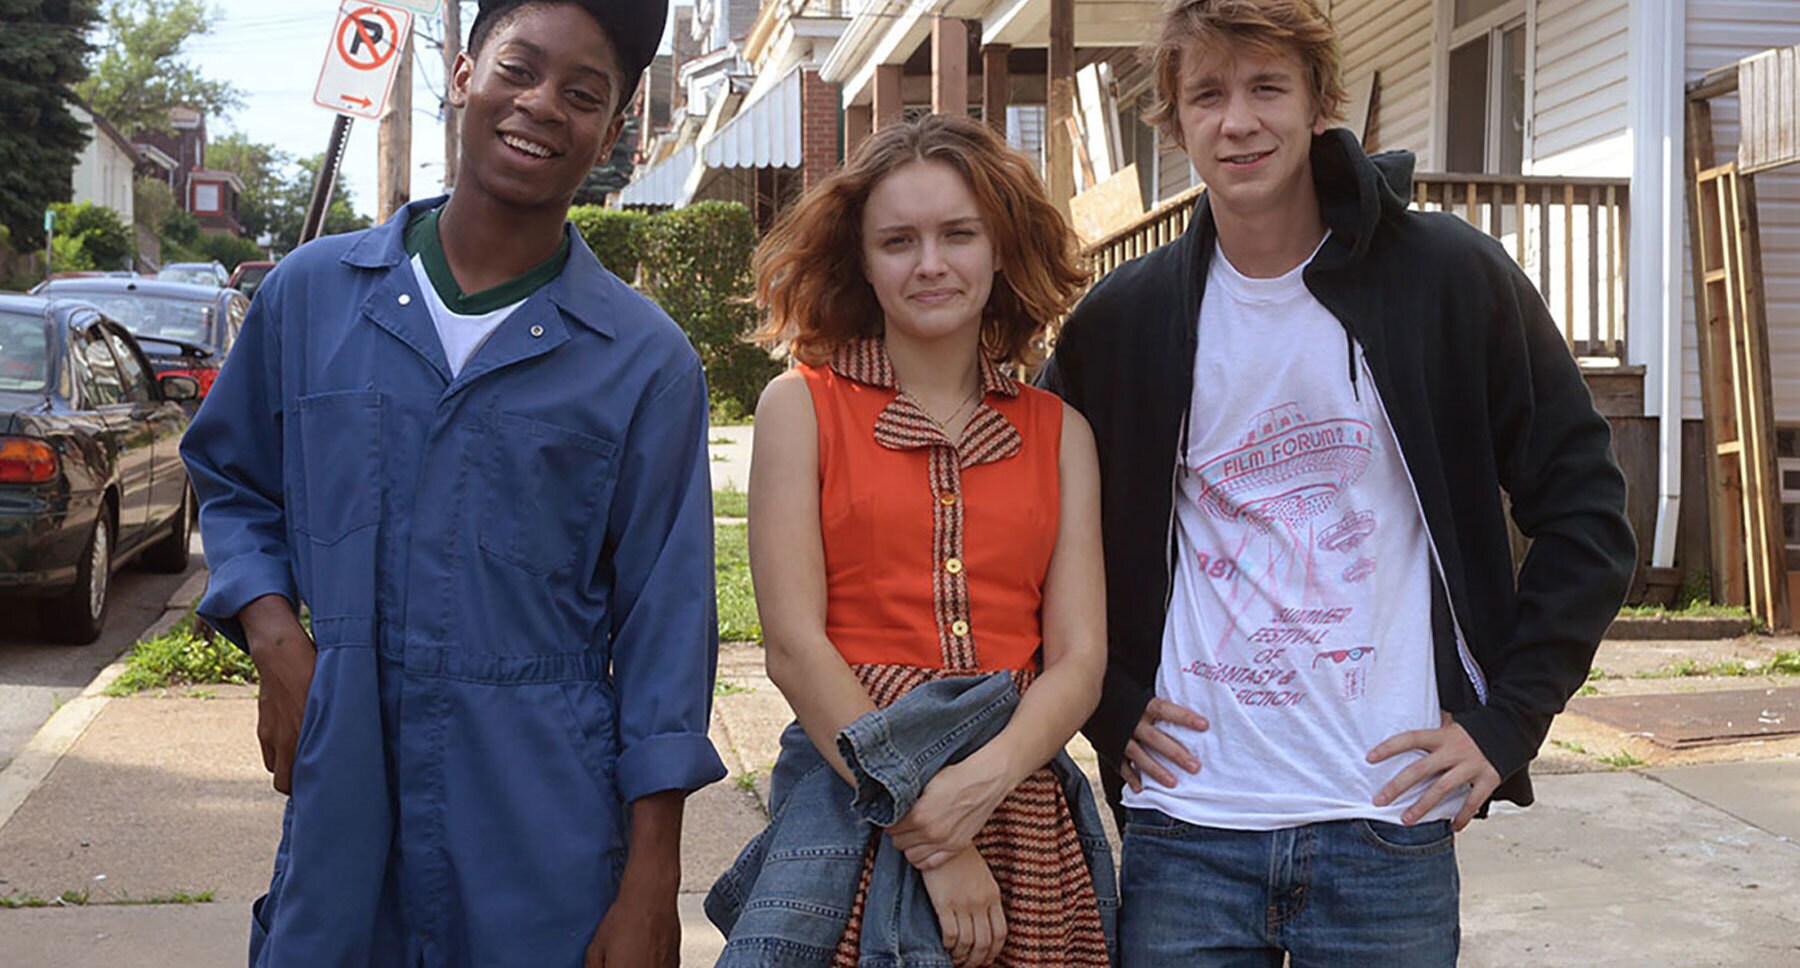 Thomas Mann (as Greg), Olivia Cooke (as Rachel) and RJ Cyler (as Earl) standing on a sidewalk Thomas Mann (as Greg) with a stuffed toy pig in "Me and Earl and the Dying Girl"